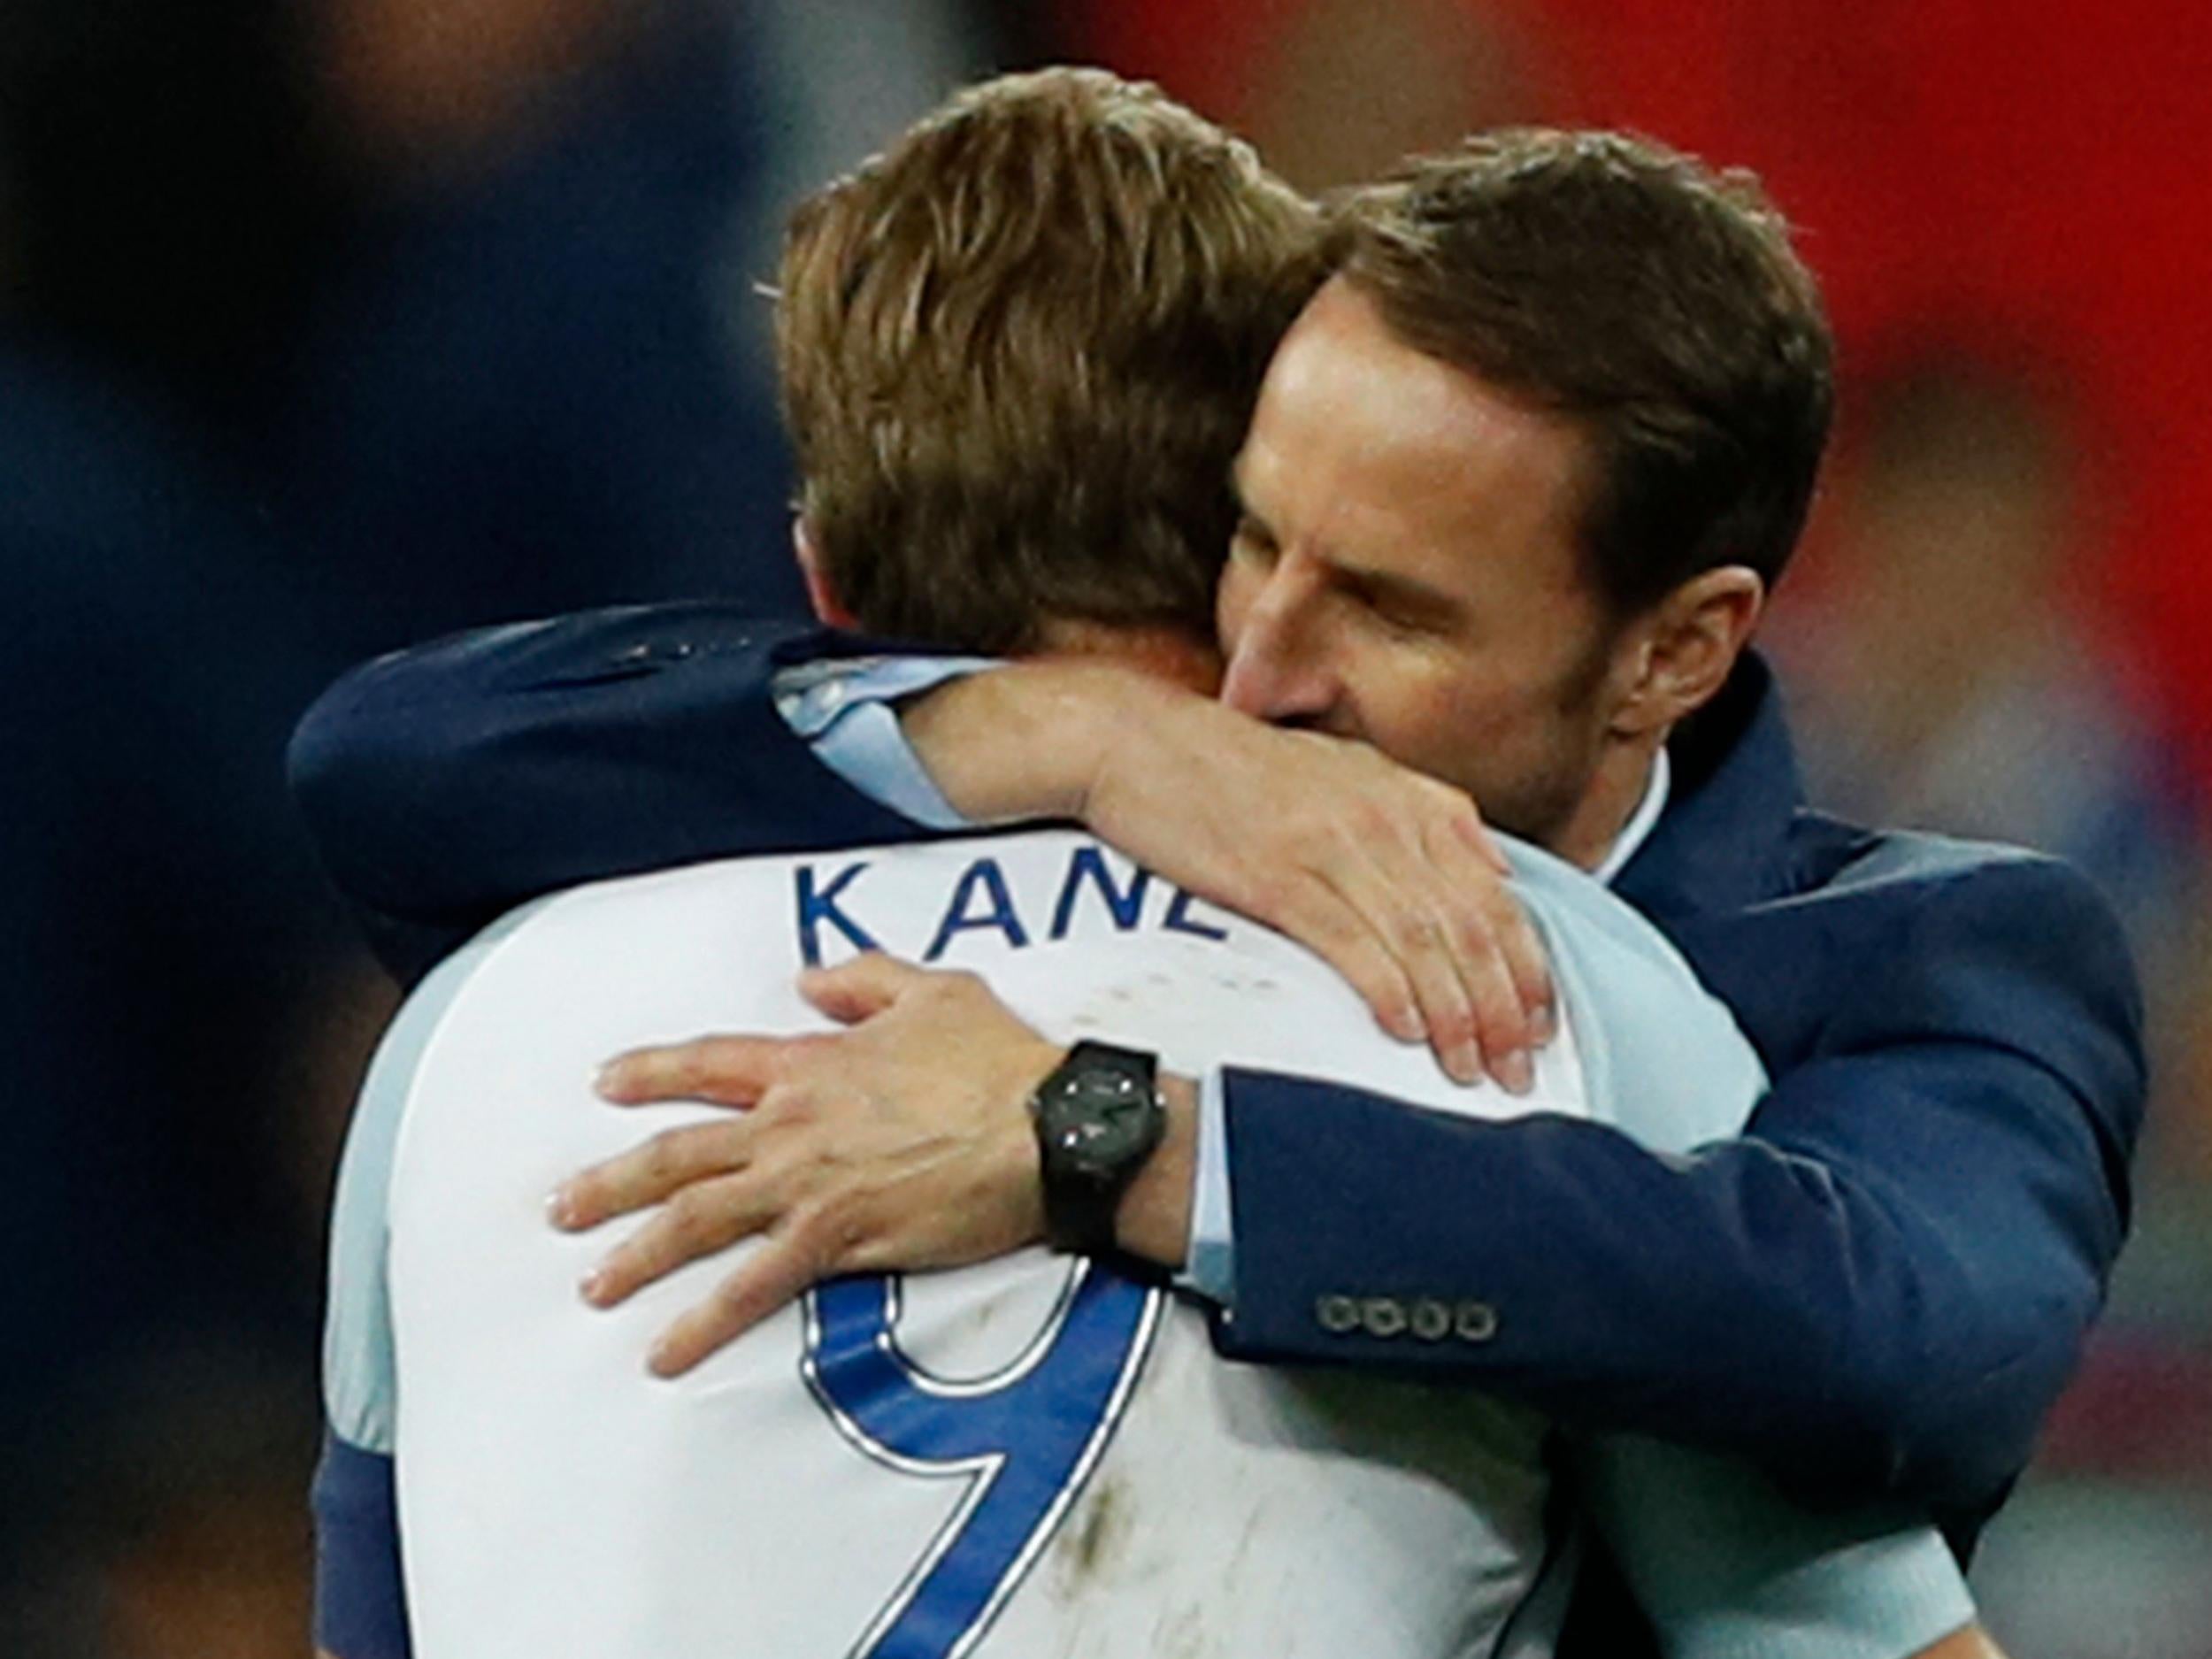 Southgate will be hoping for an improved performance